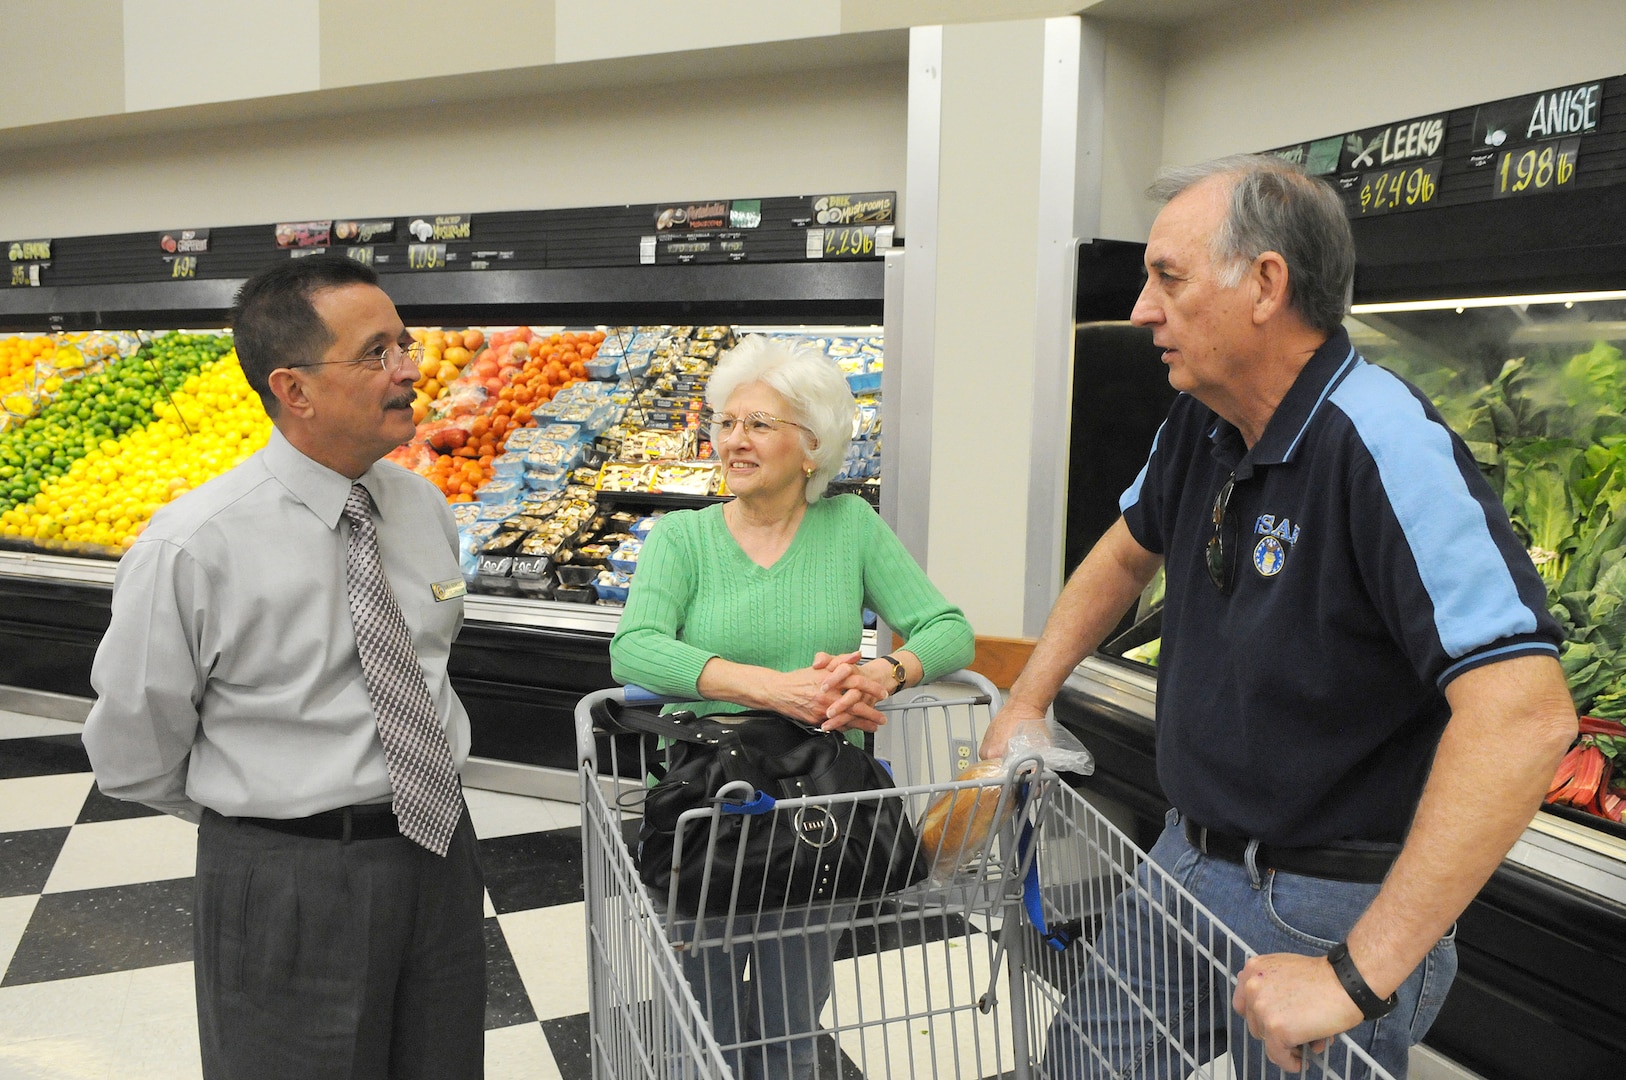 New commissary manager Juan Rodriguez greets customers Anne and Clifton Hedgepeth, retired master sergeant, as they begin their shopping in the produce department in the commissary at Randolph Air Force Base, Texas. (U.S. Air Force photo/David Terry)